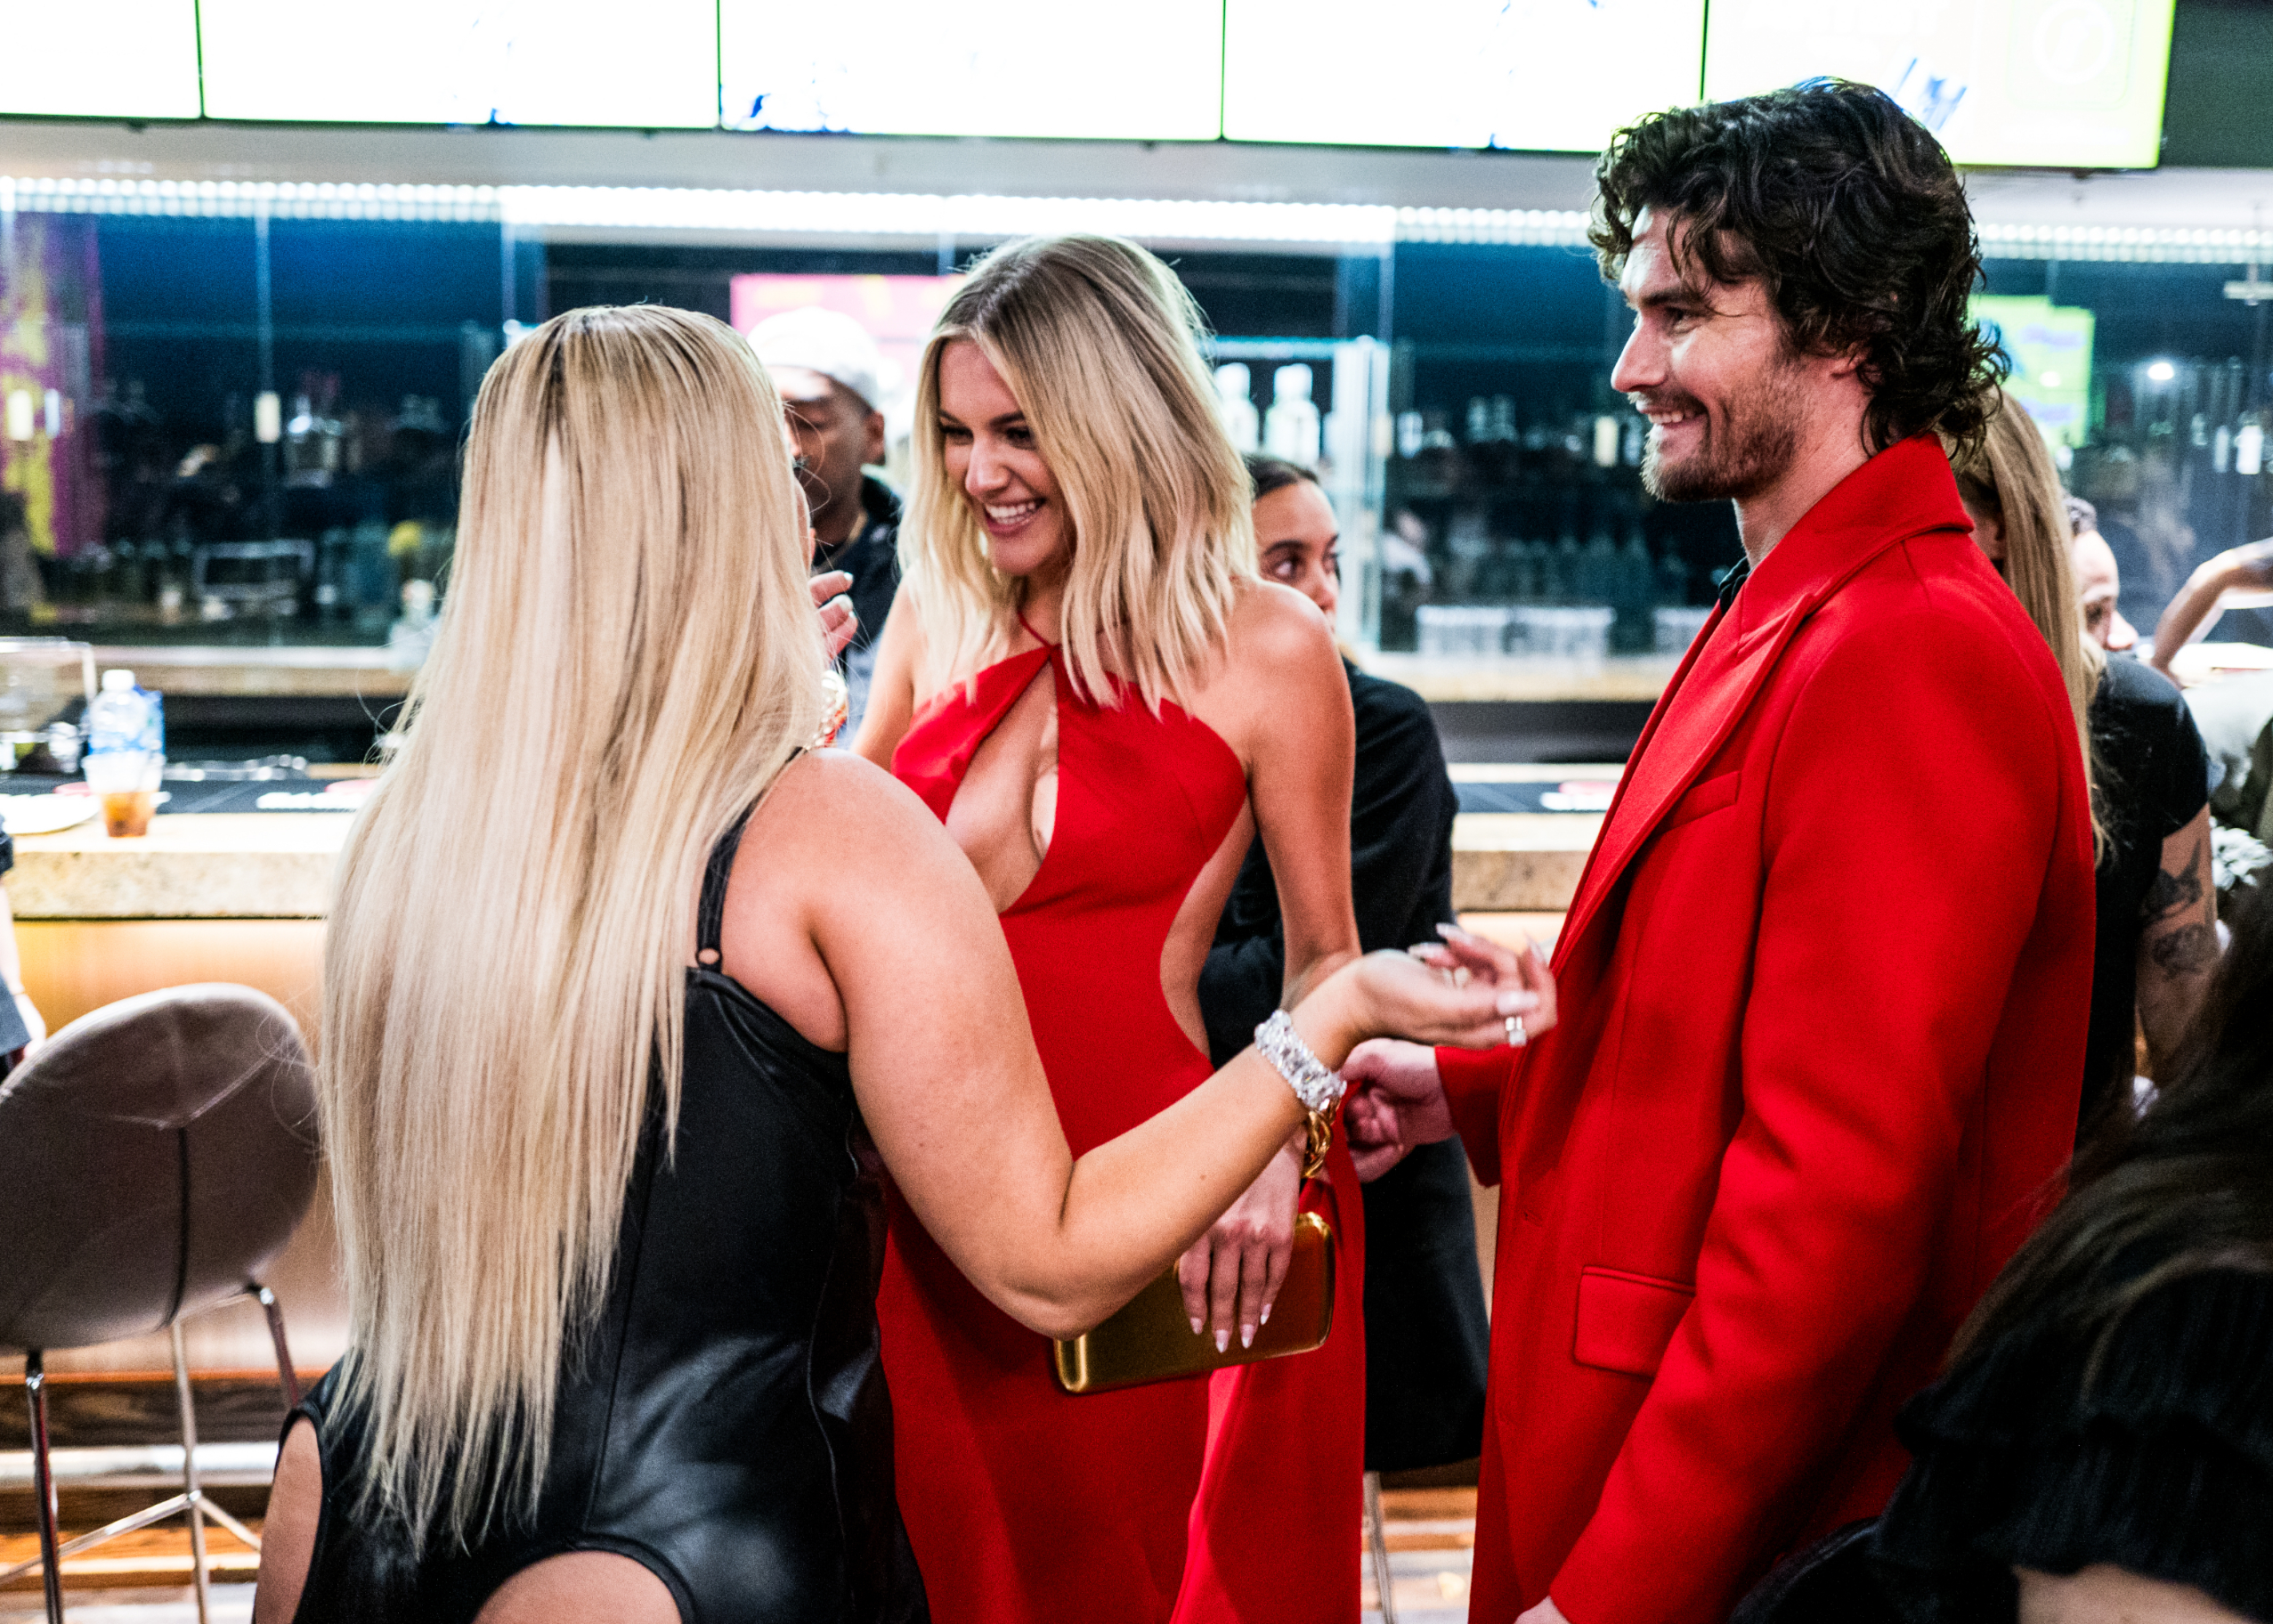 Kelsea and Chase smile at Bebe as they stand together